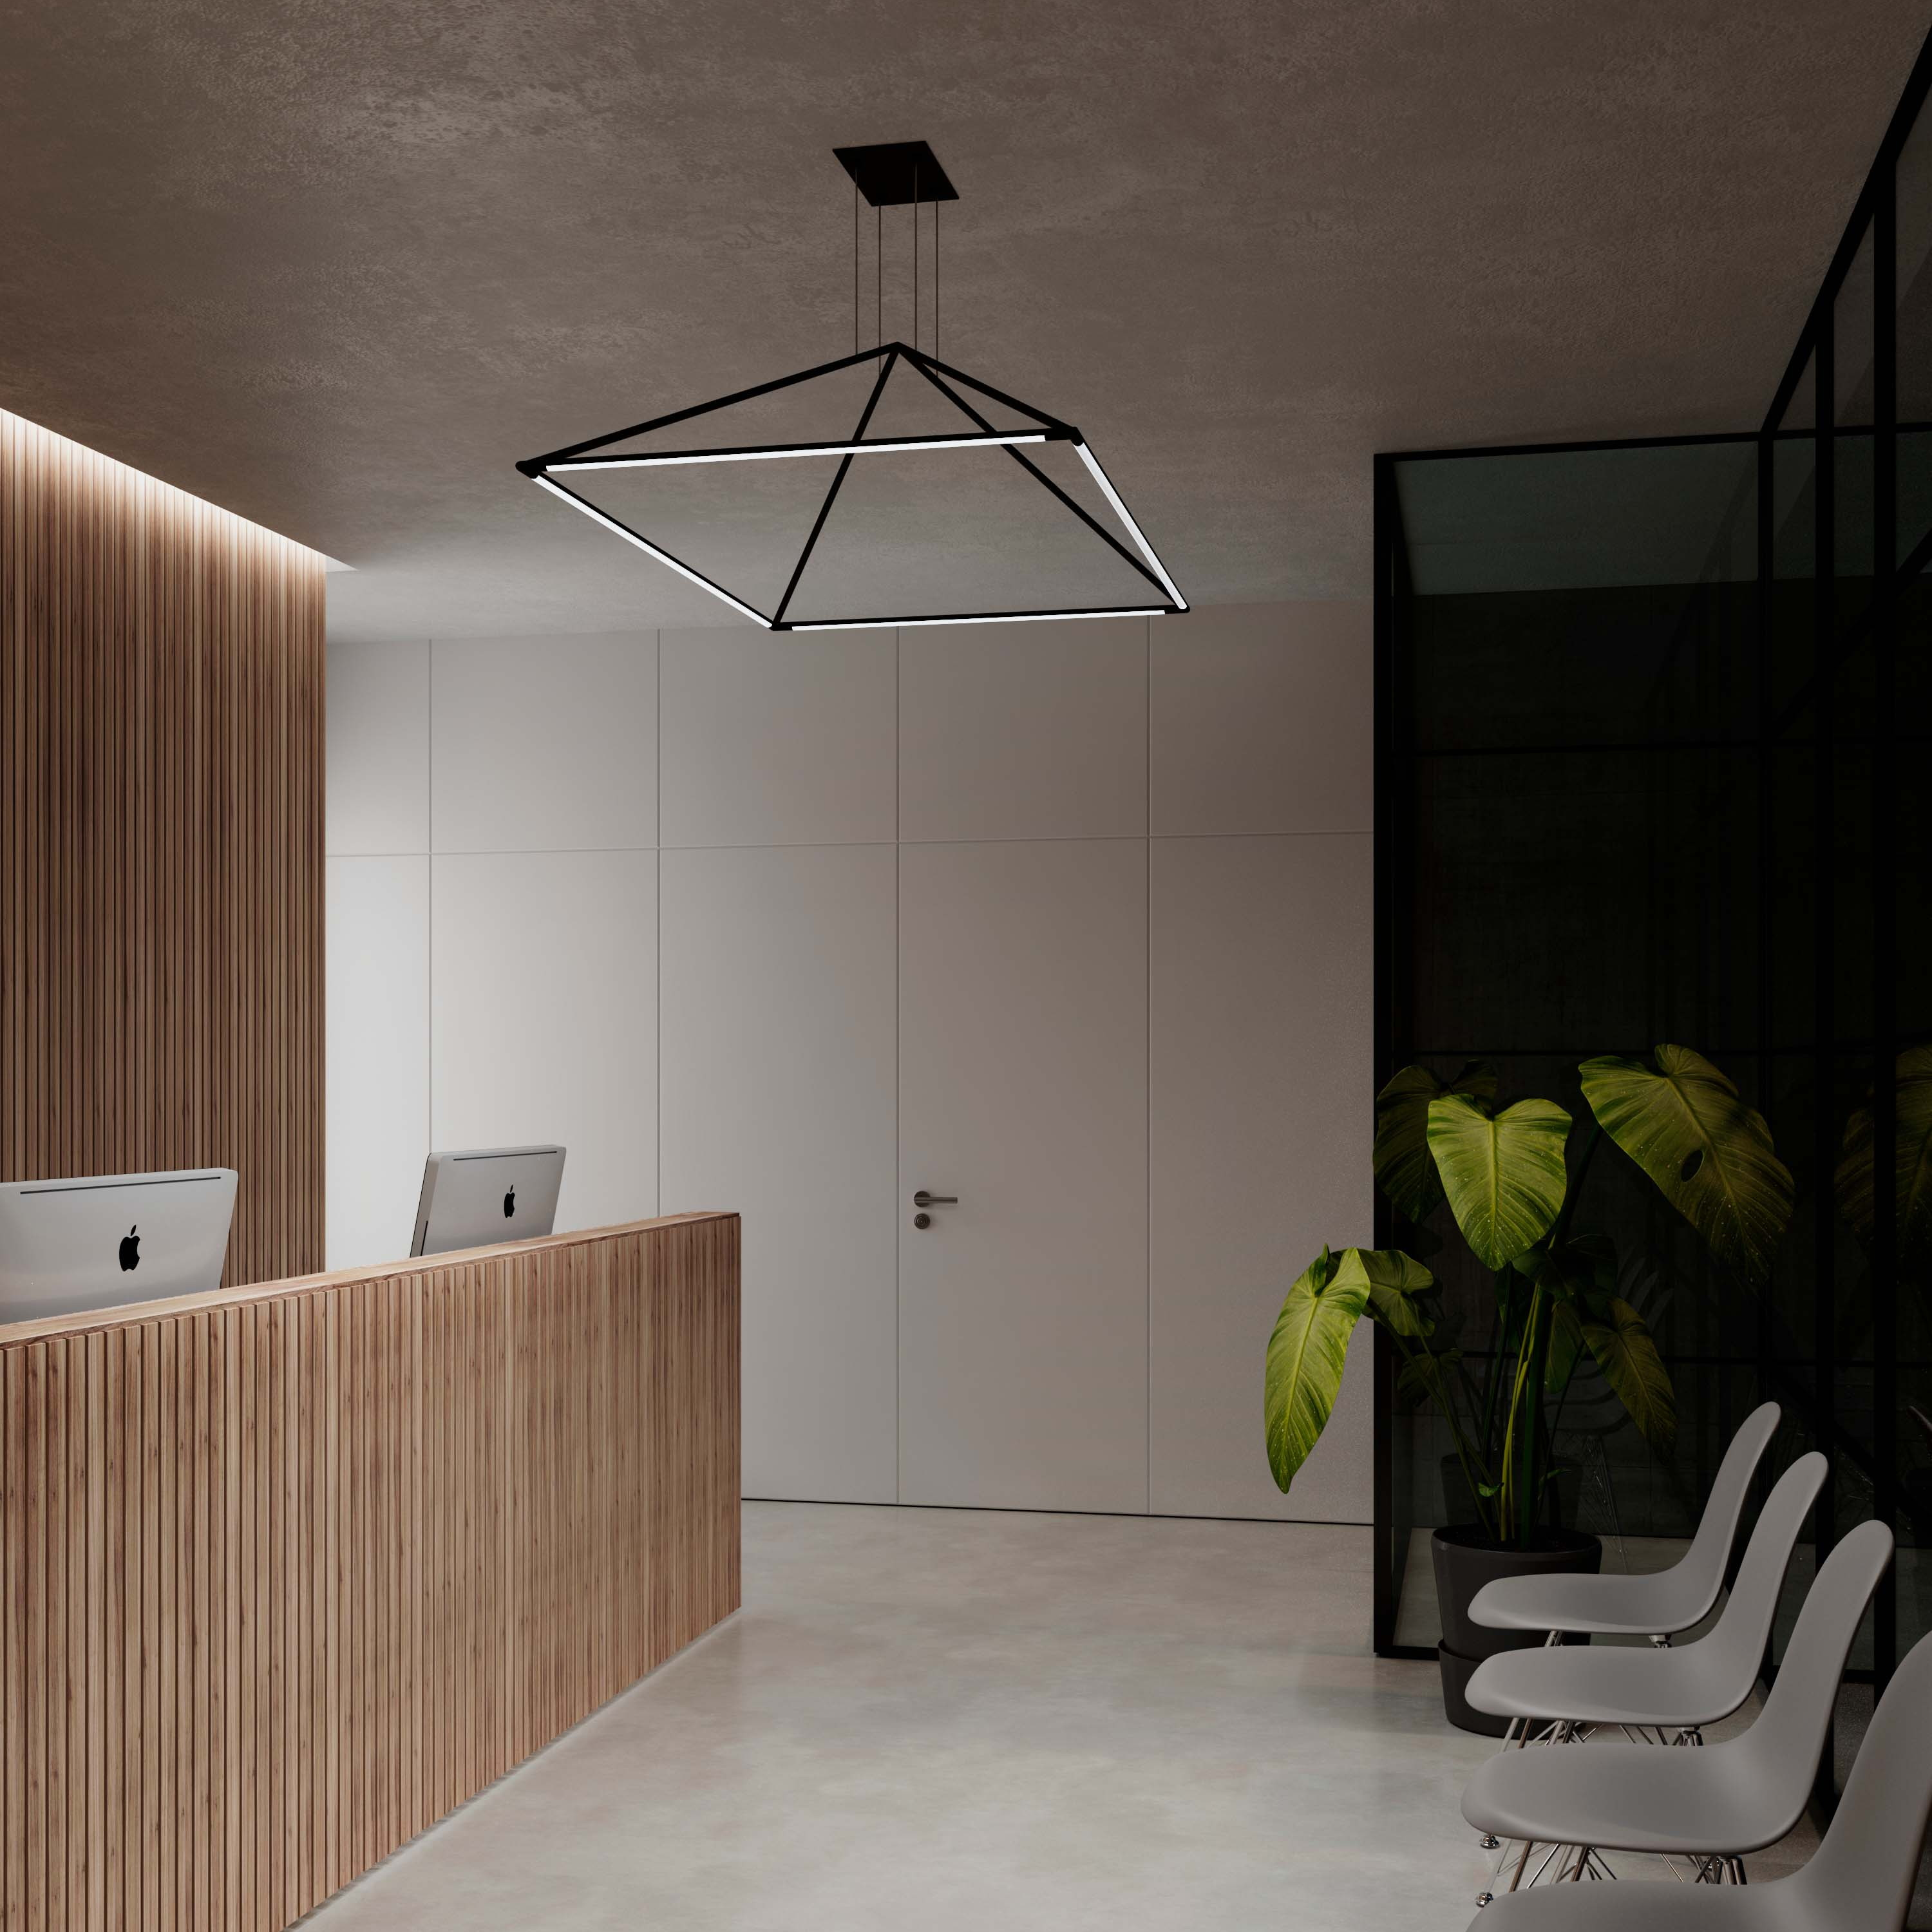 Tubs Feature Lighting for Reception Areas